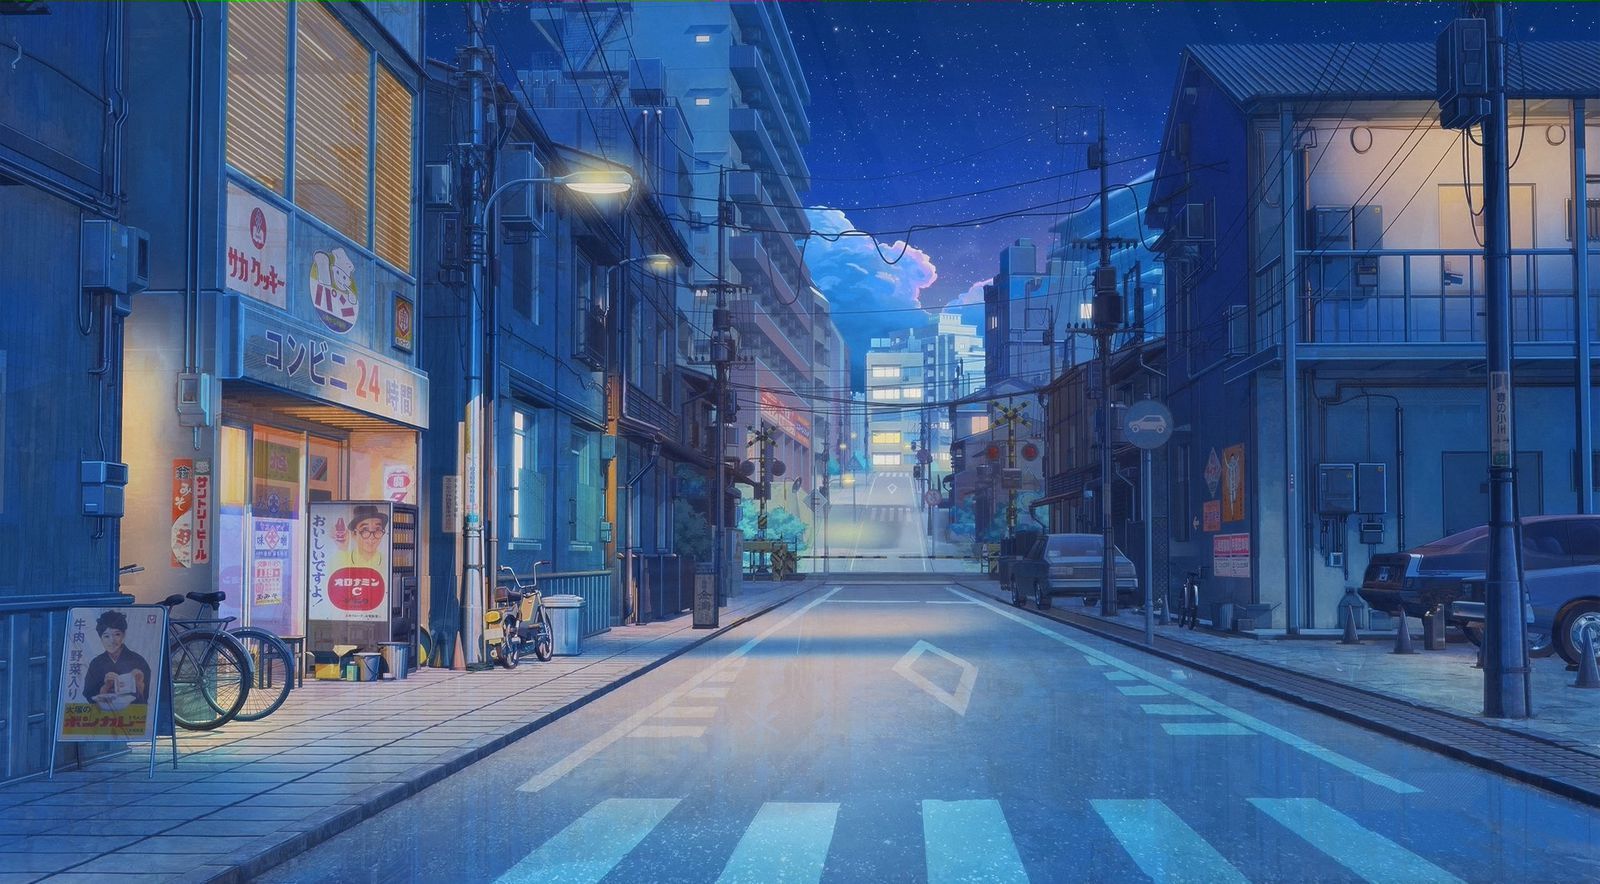 Download Anime Scenery Wallpaper Iphone Aesthetic Anime City Background ...